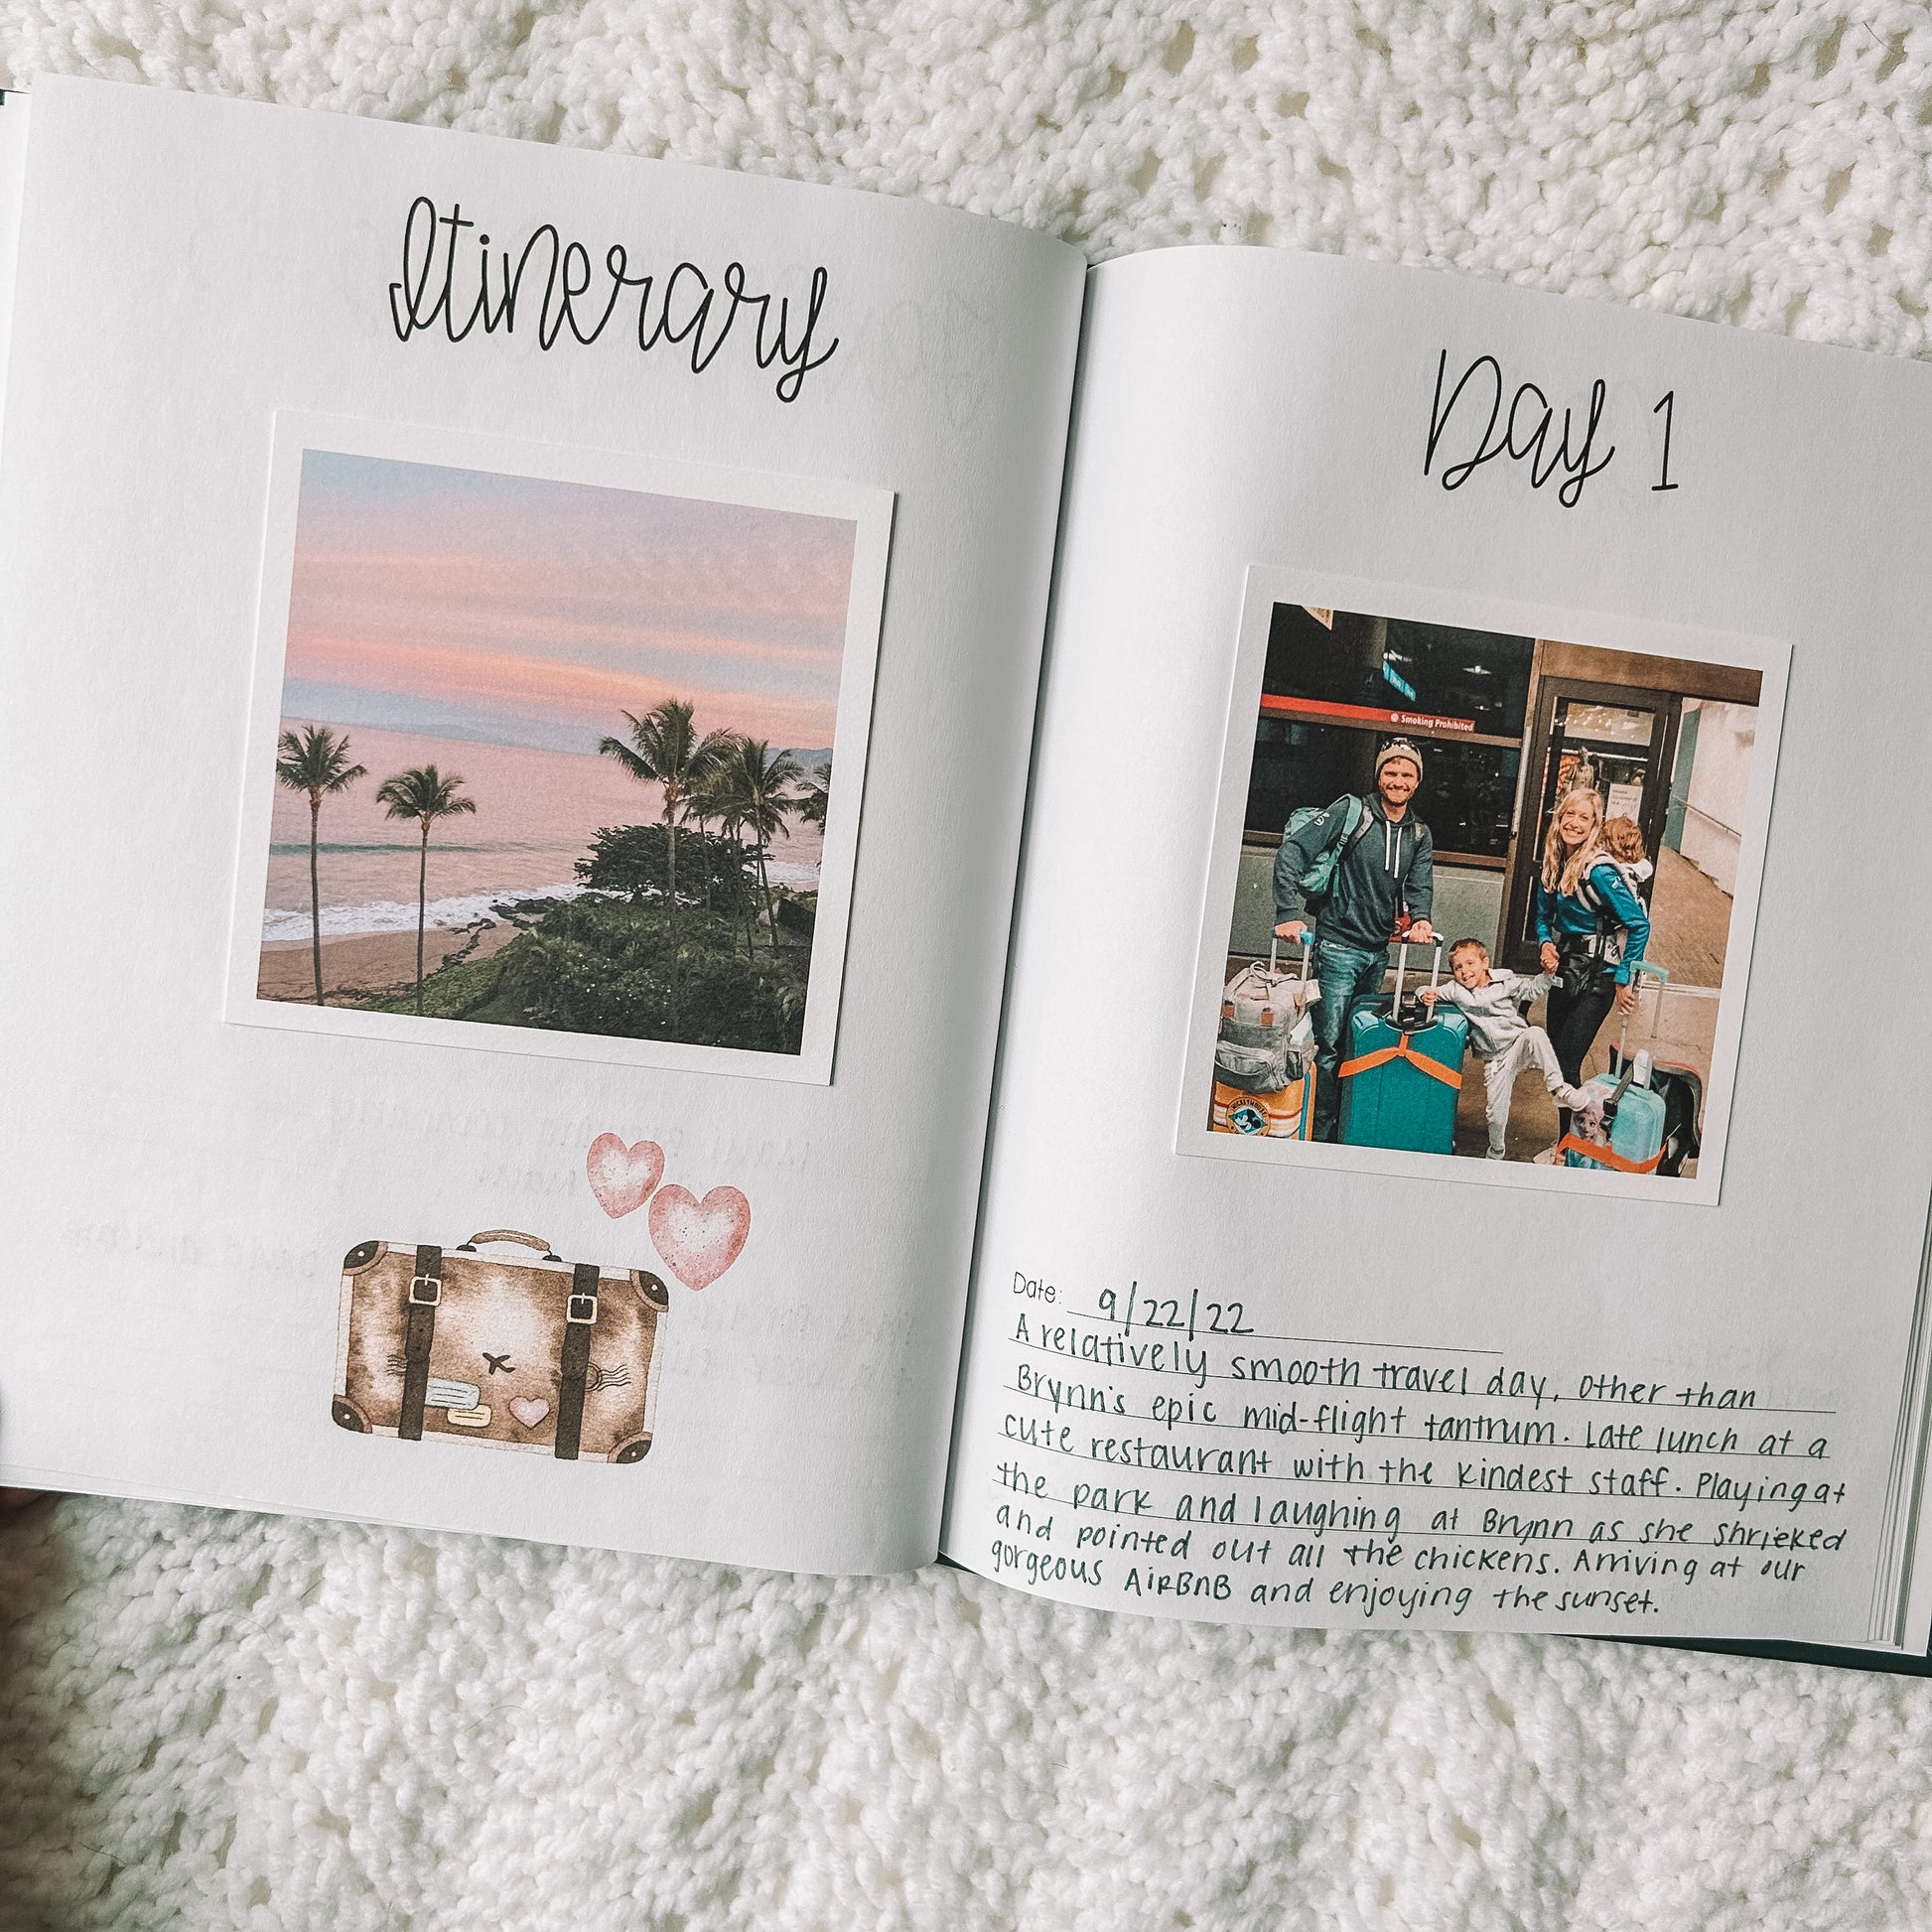 Lefthand side is titled Itinerary with a graphic of a suitcase and hearts at the bottom and blank space in the middle. Righthand side is titled Day 1, has space for a photo, the date, and blank lines to record about your day.